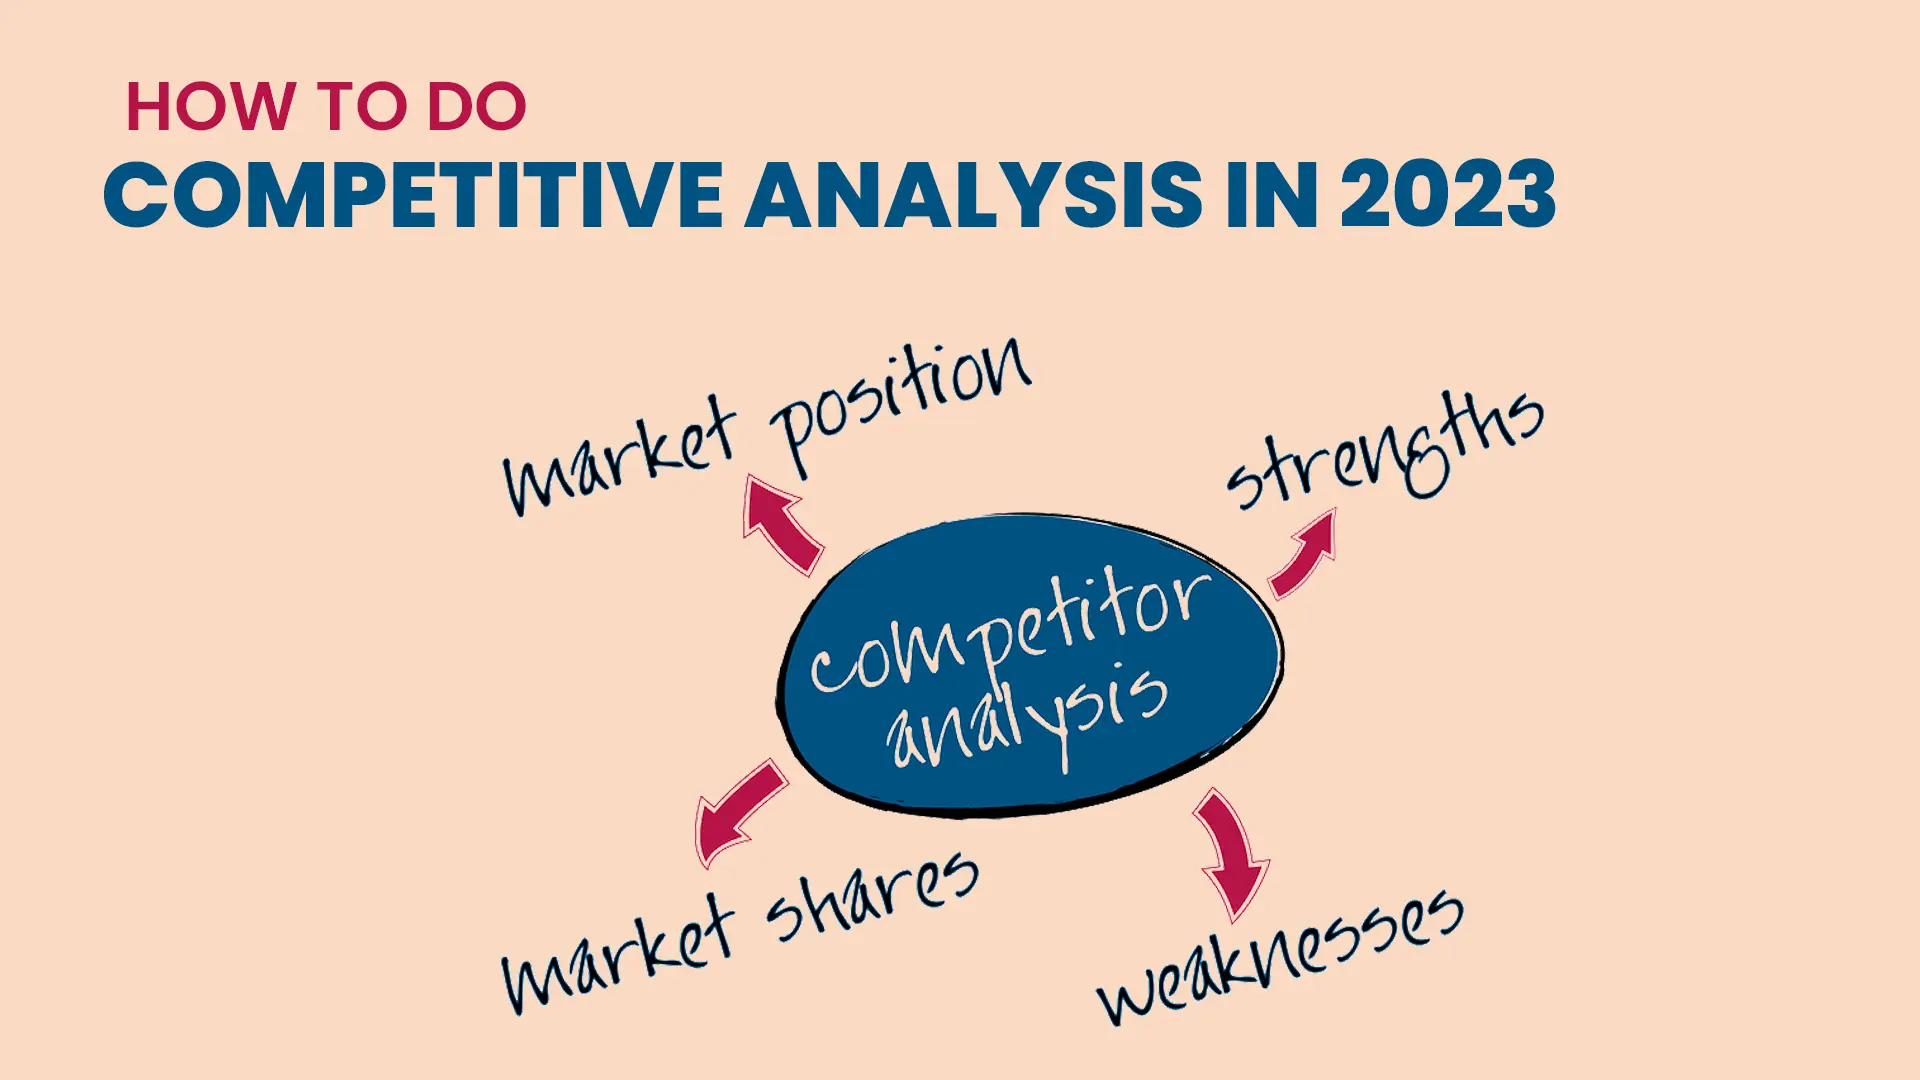 How to do competitive analysis in 2023